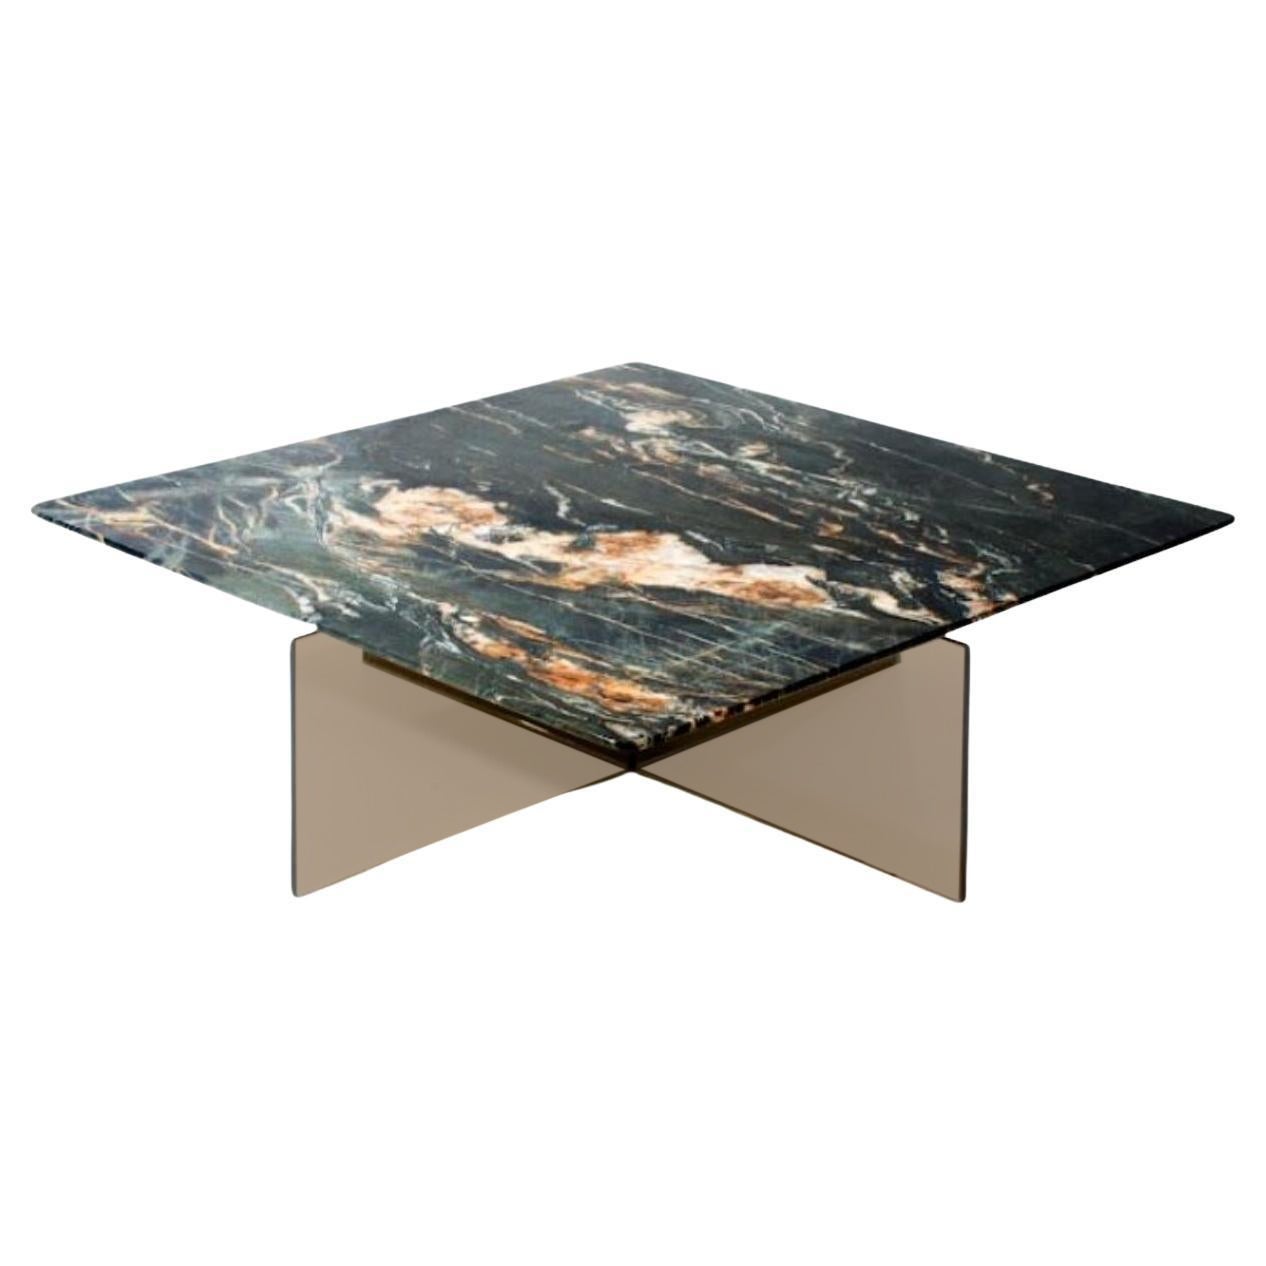 Belvedere Black beside Myself Square Coffee Table by Claste